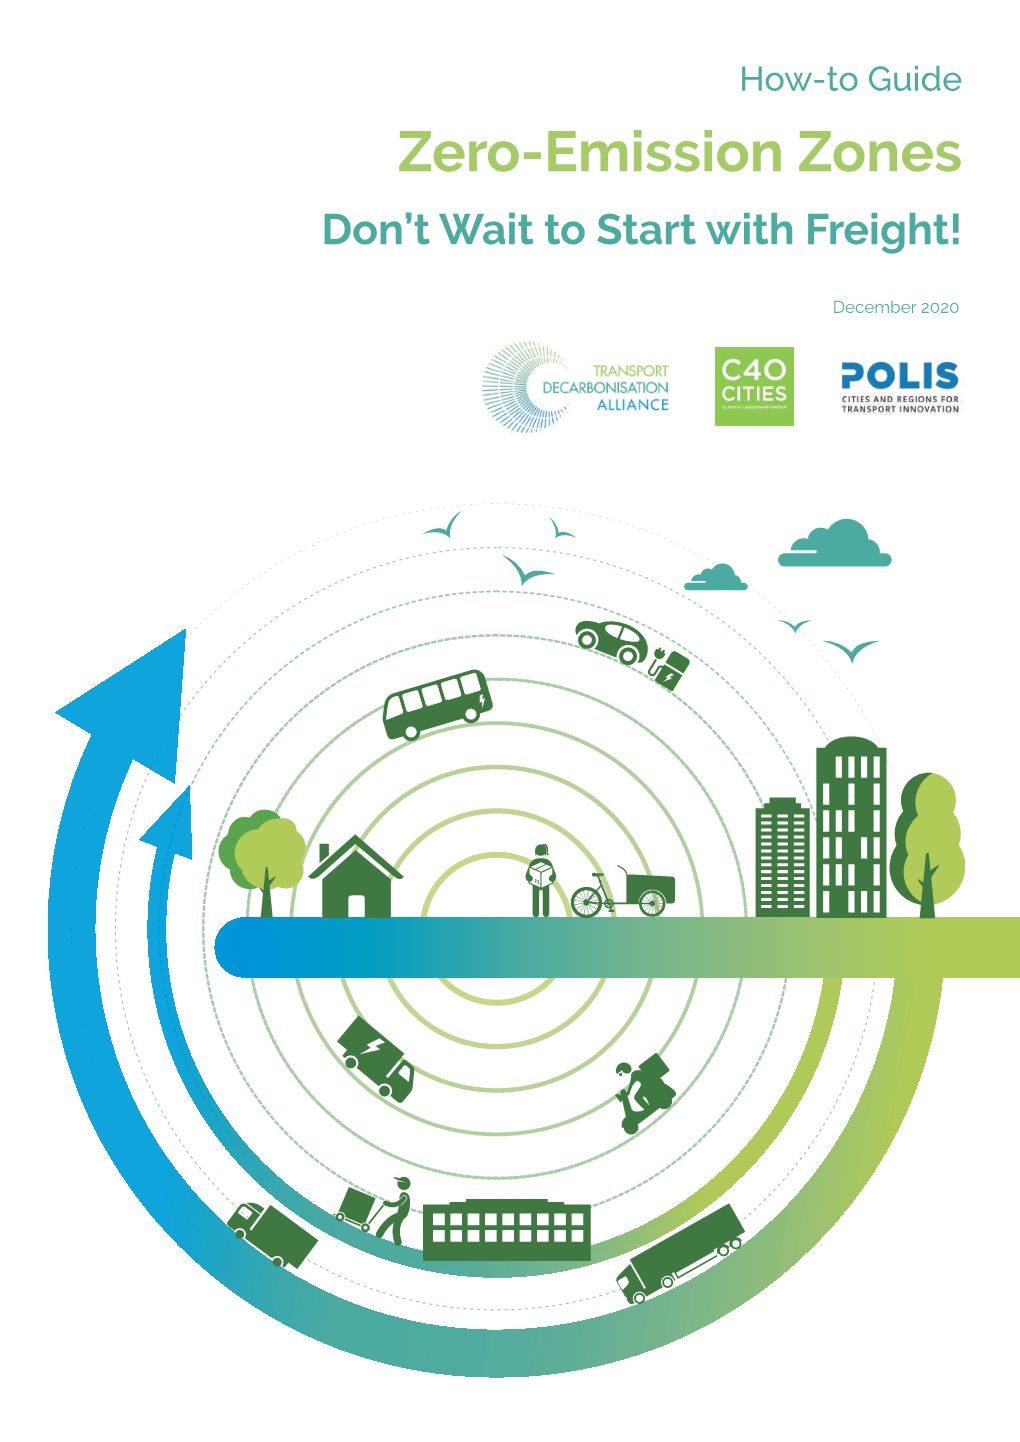 Zero-Emission Zones: Don't Wait to Start with Freight